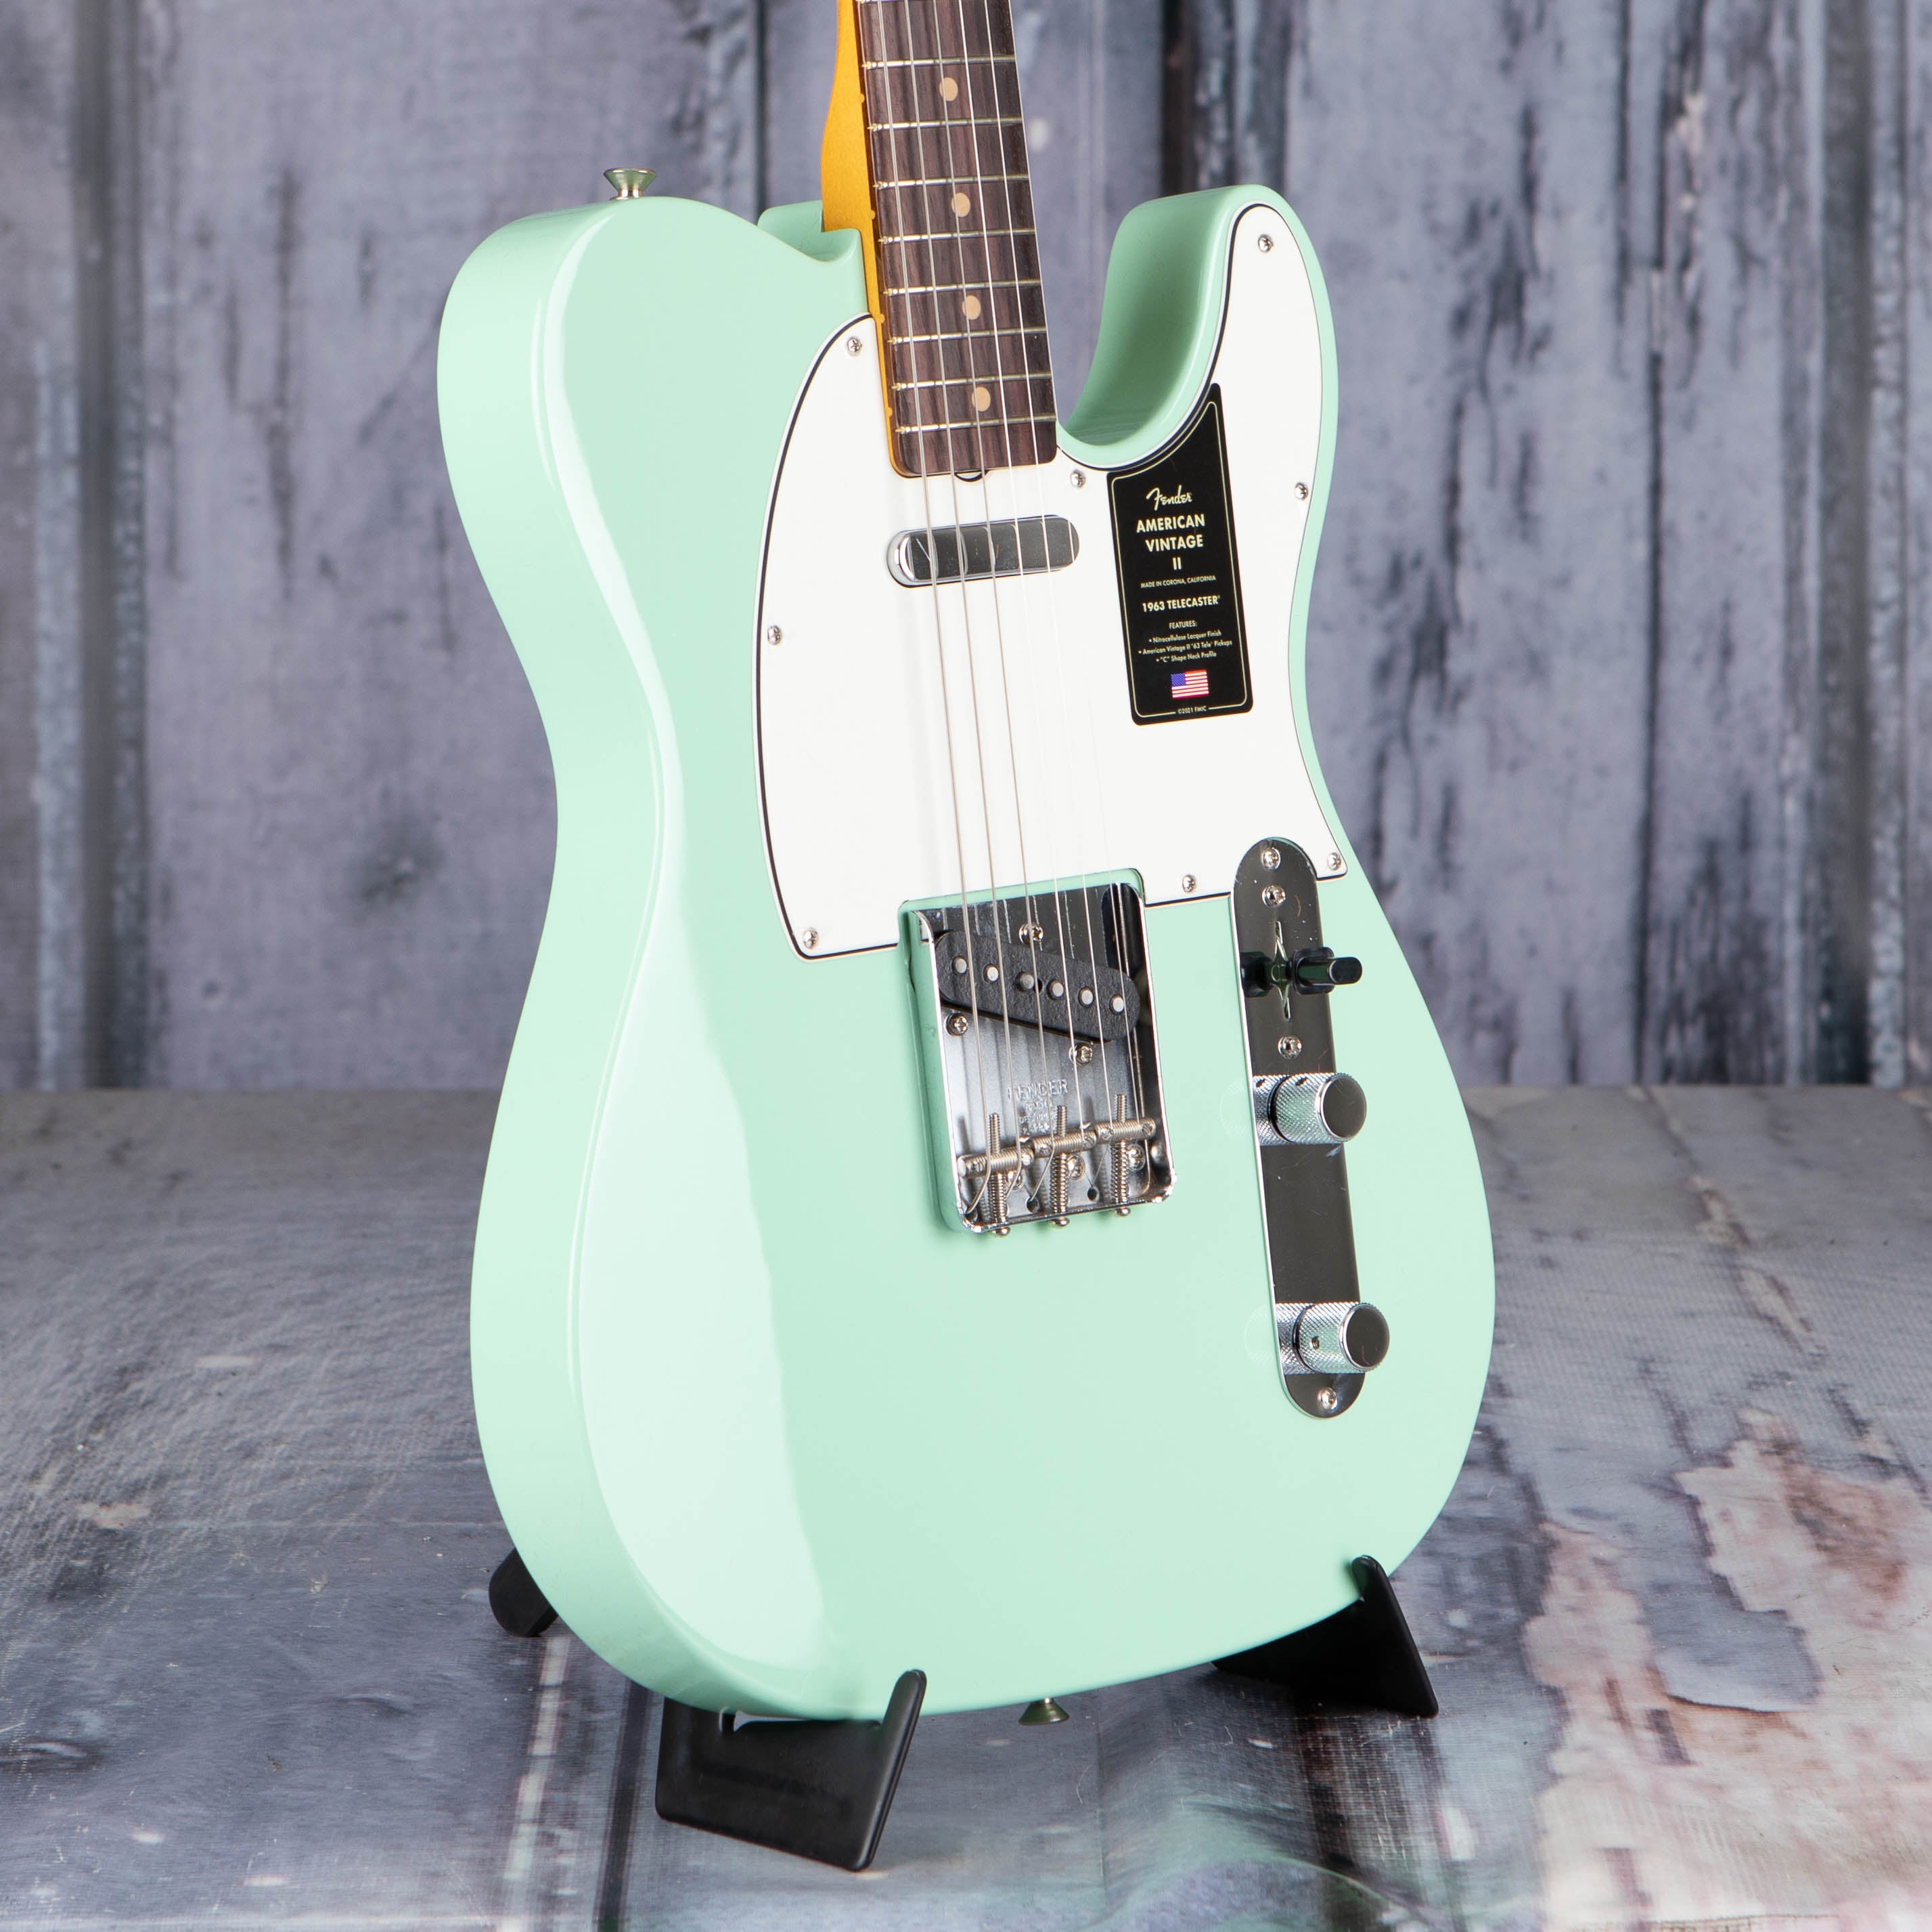 Fender American Vintage II 1963 Telecaster Electric Guitar, Surf Green, angle